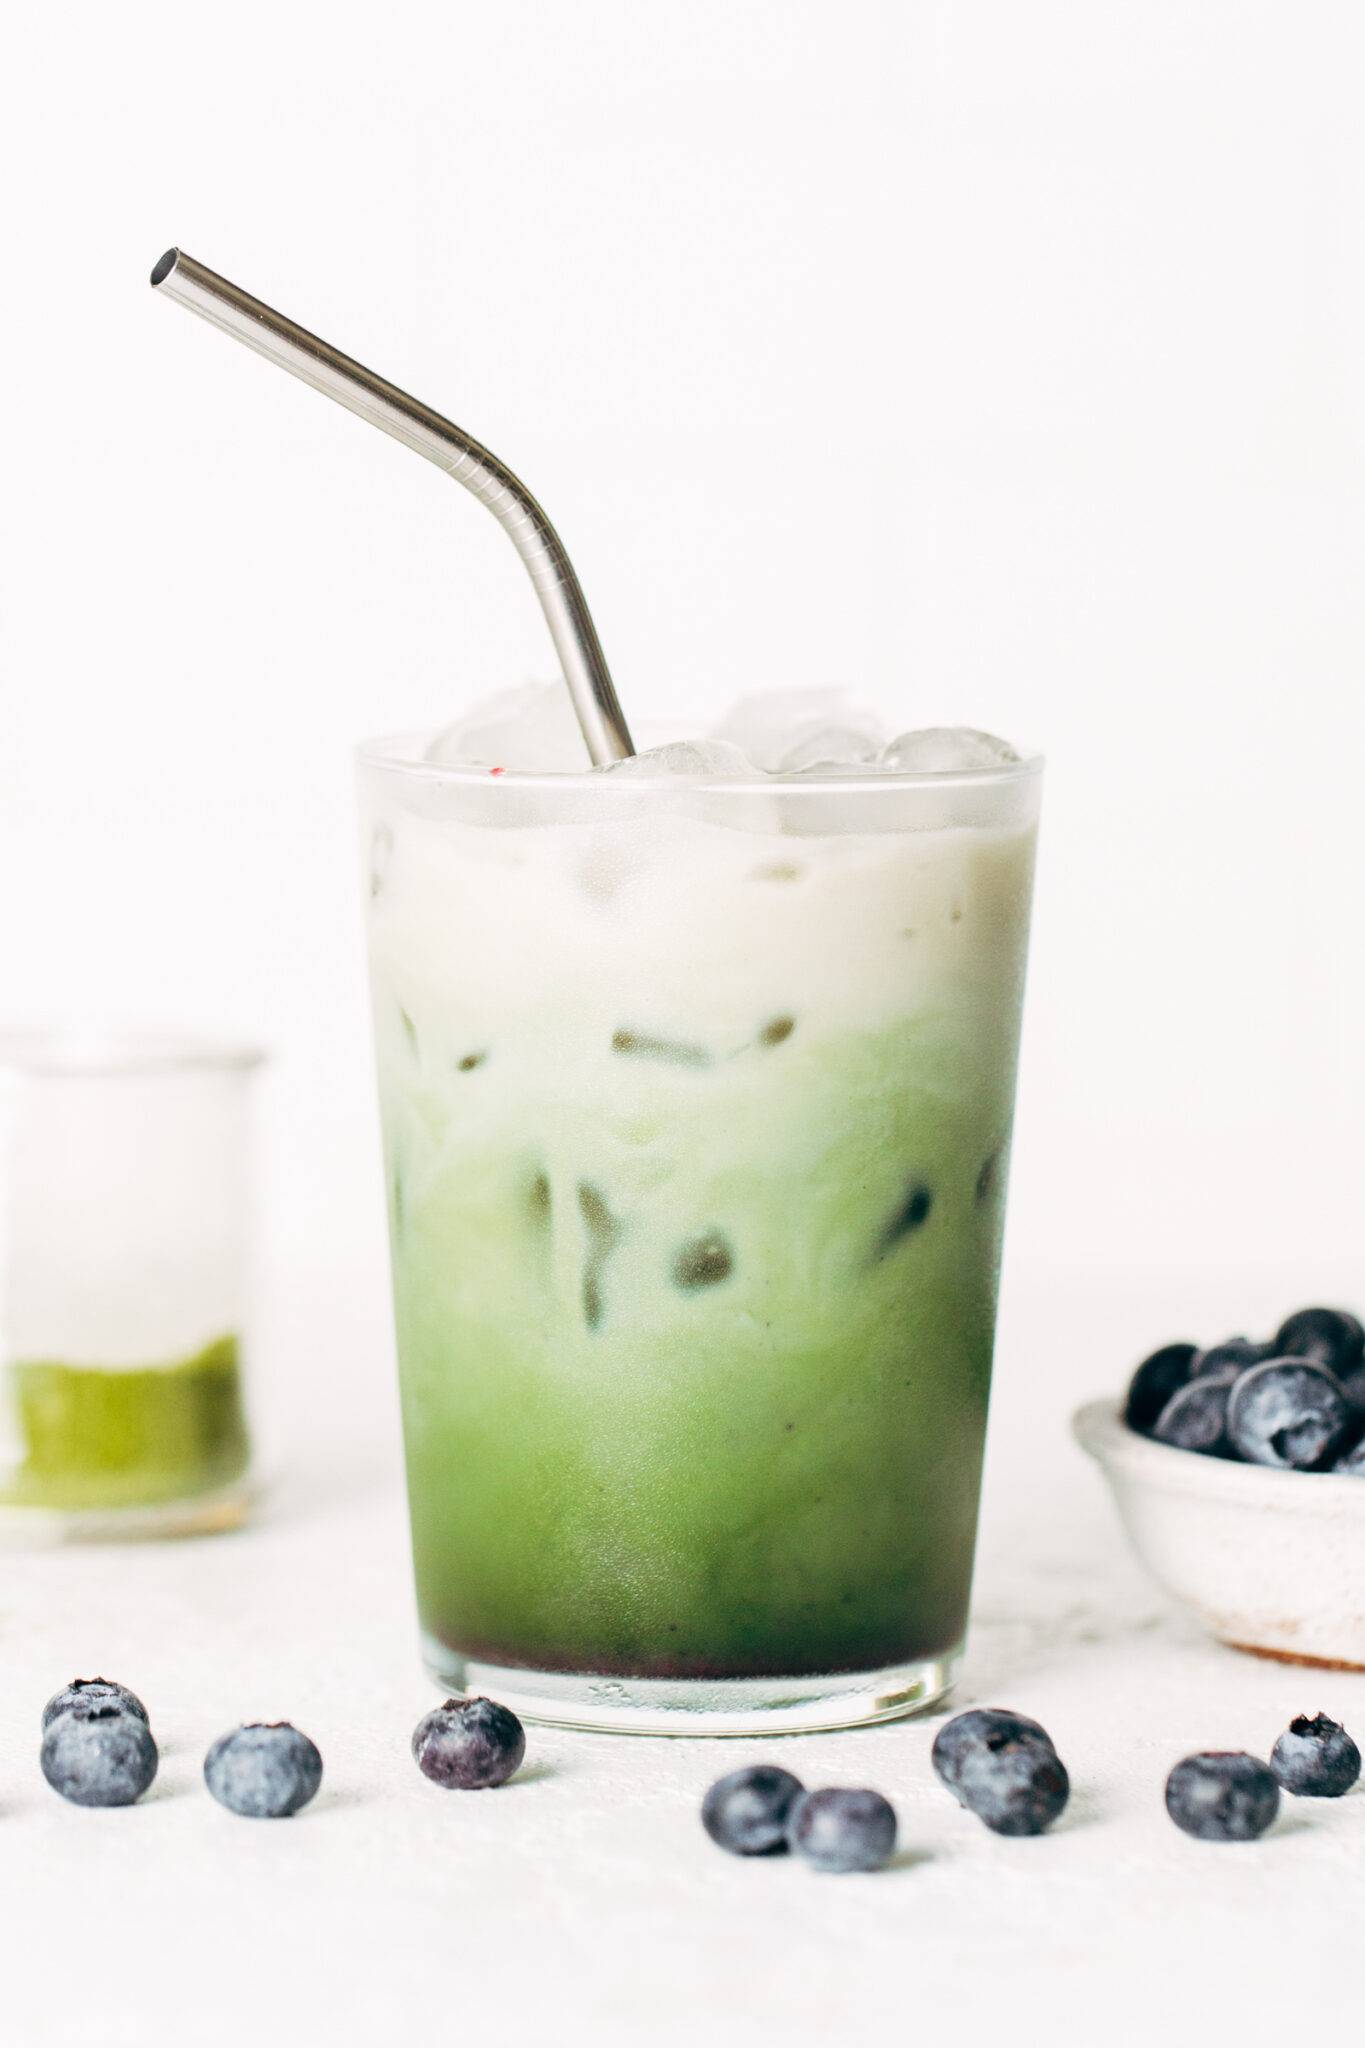 A photograph of a blueberry matcha latte in a glass with a metal straw.